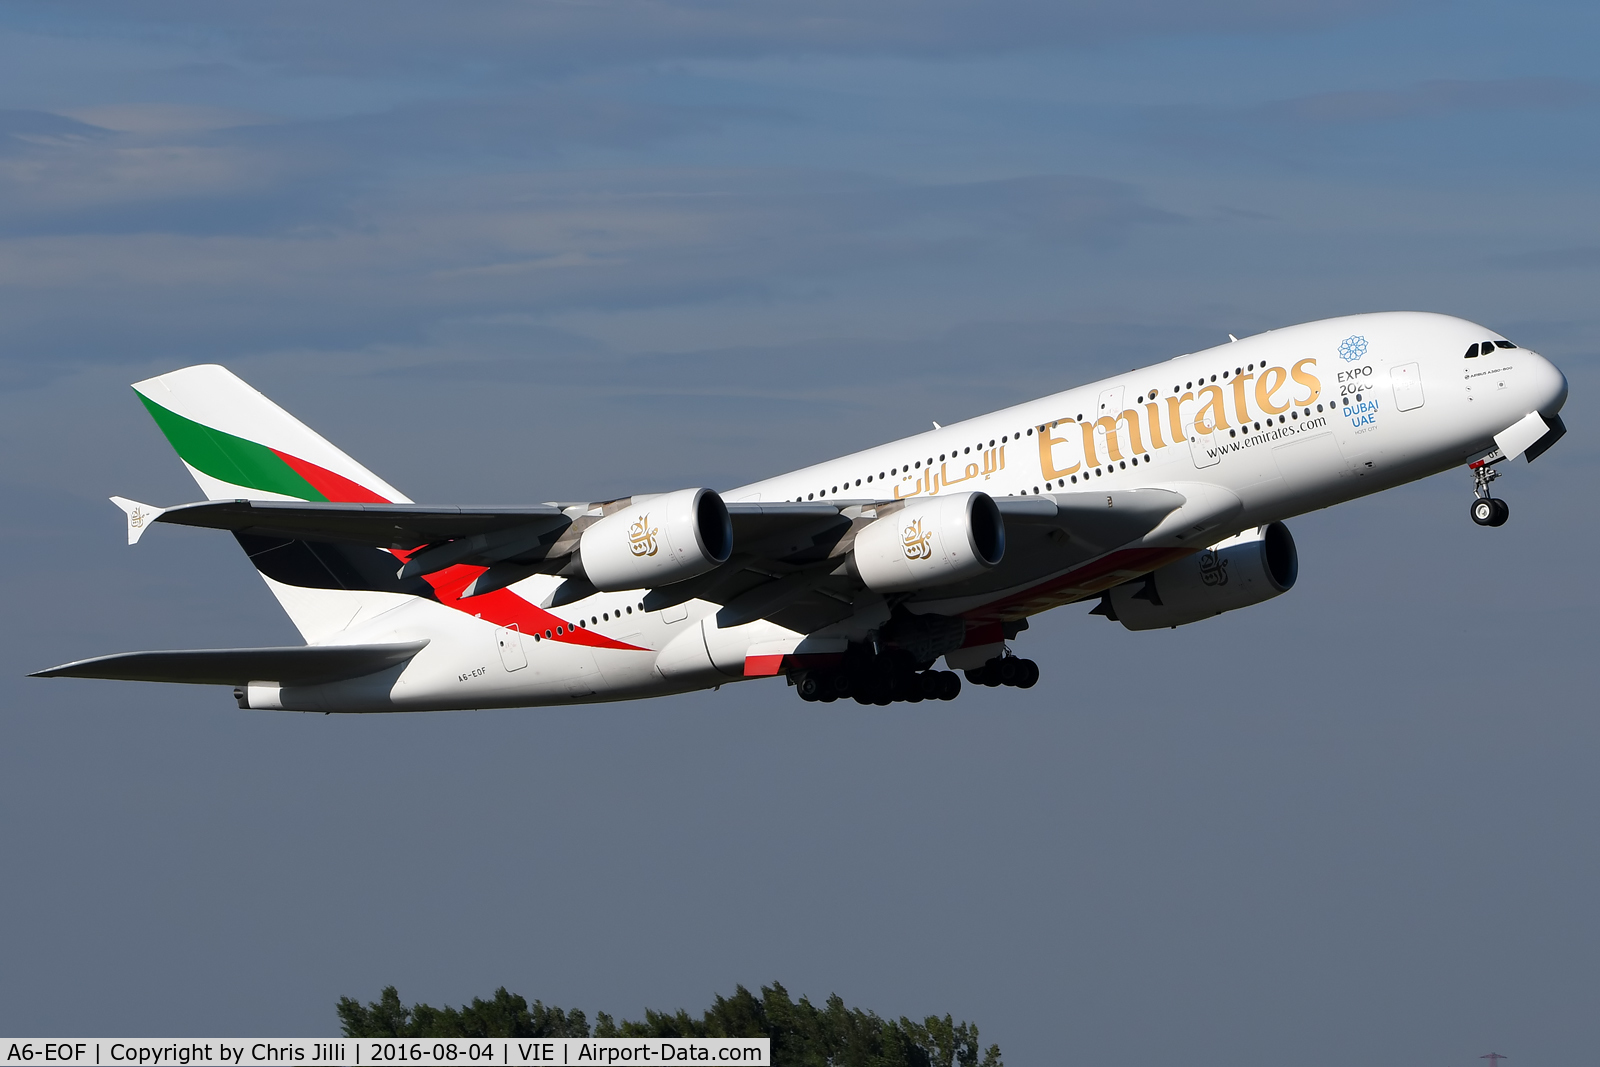 A6-EOF, 2014 Airbus A380-861 C/N 171, Emirates